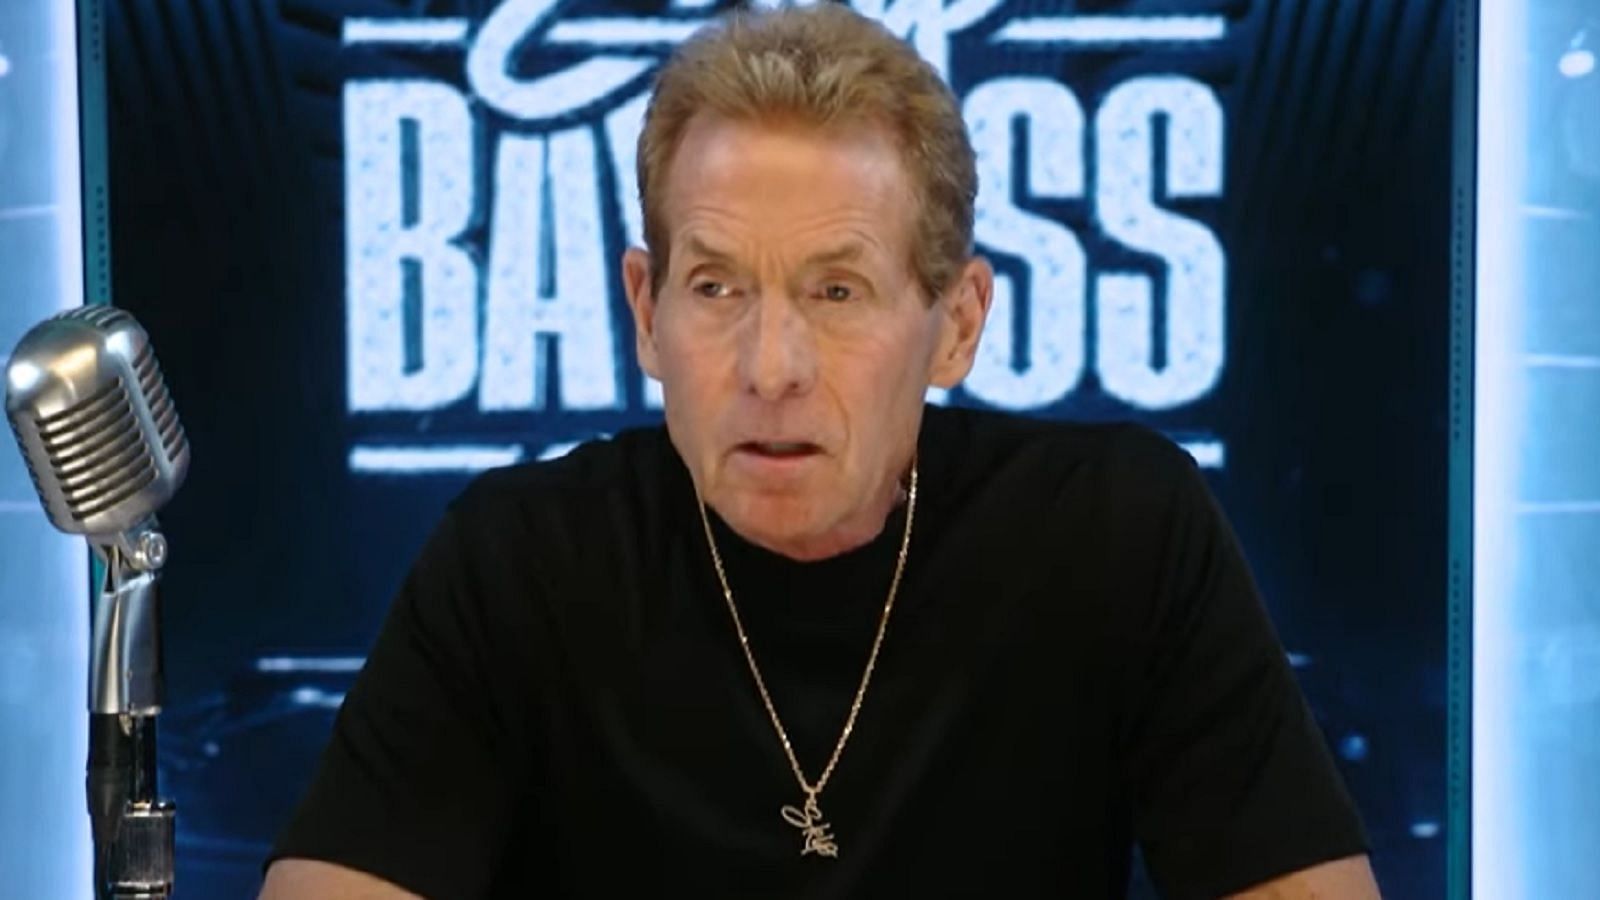 Skip Bayless is no stranger to controversial takes